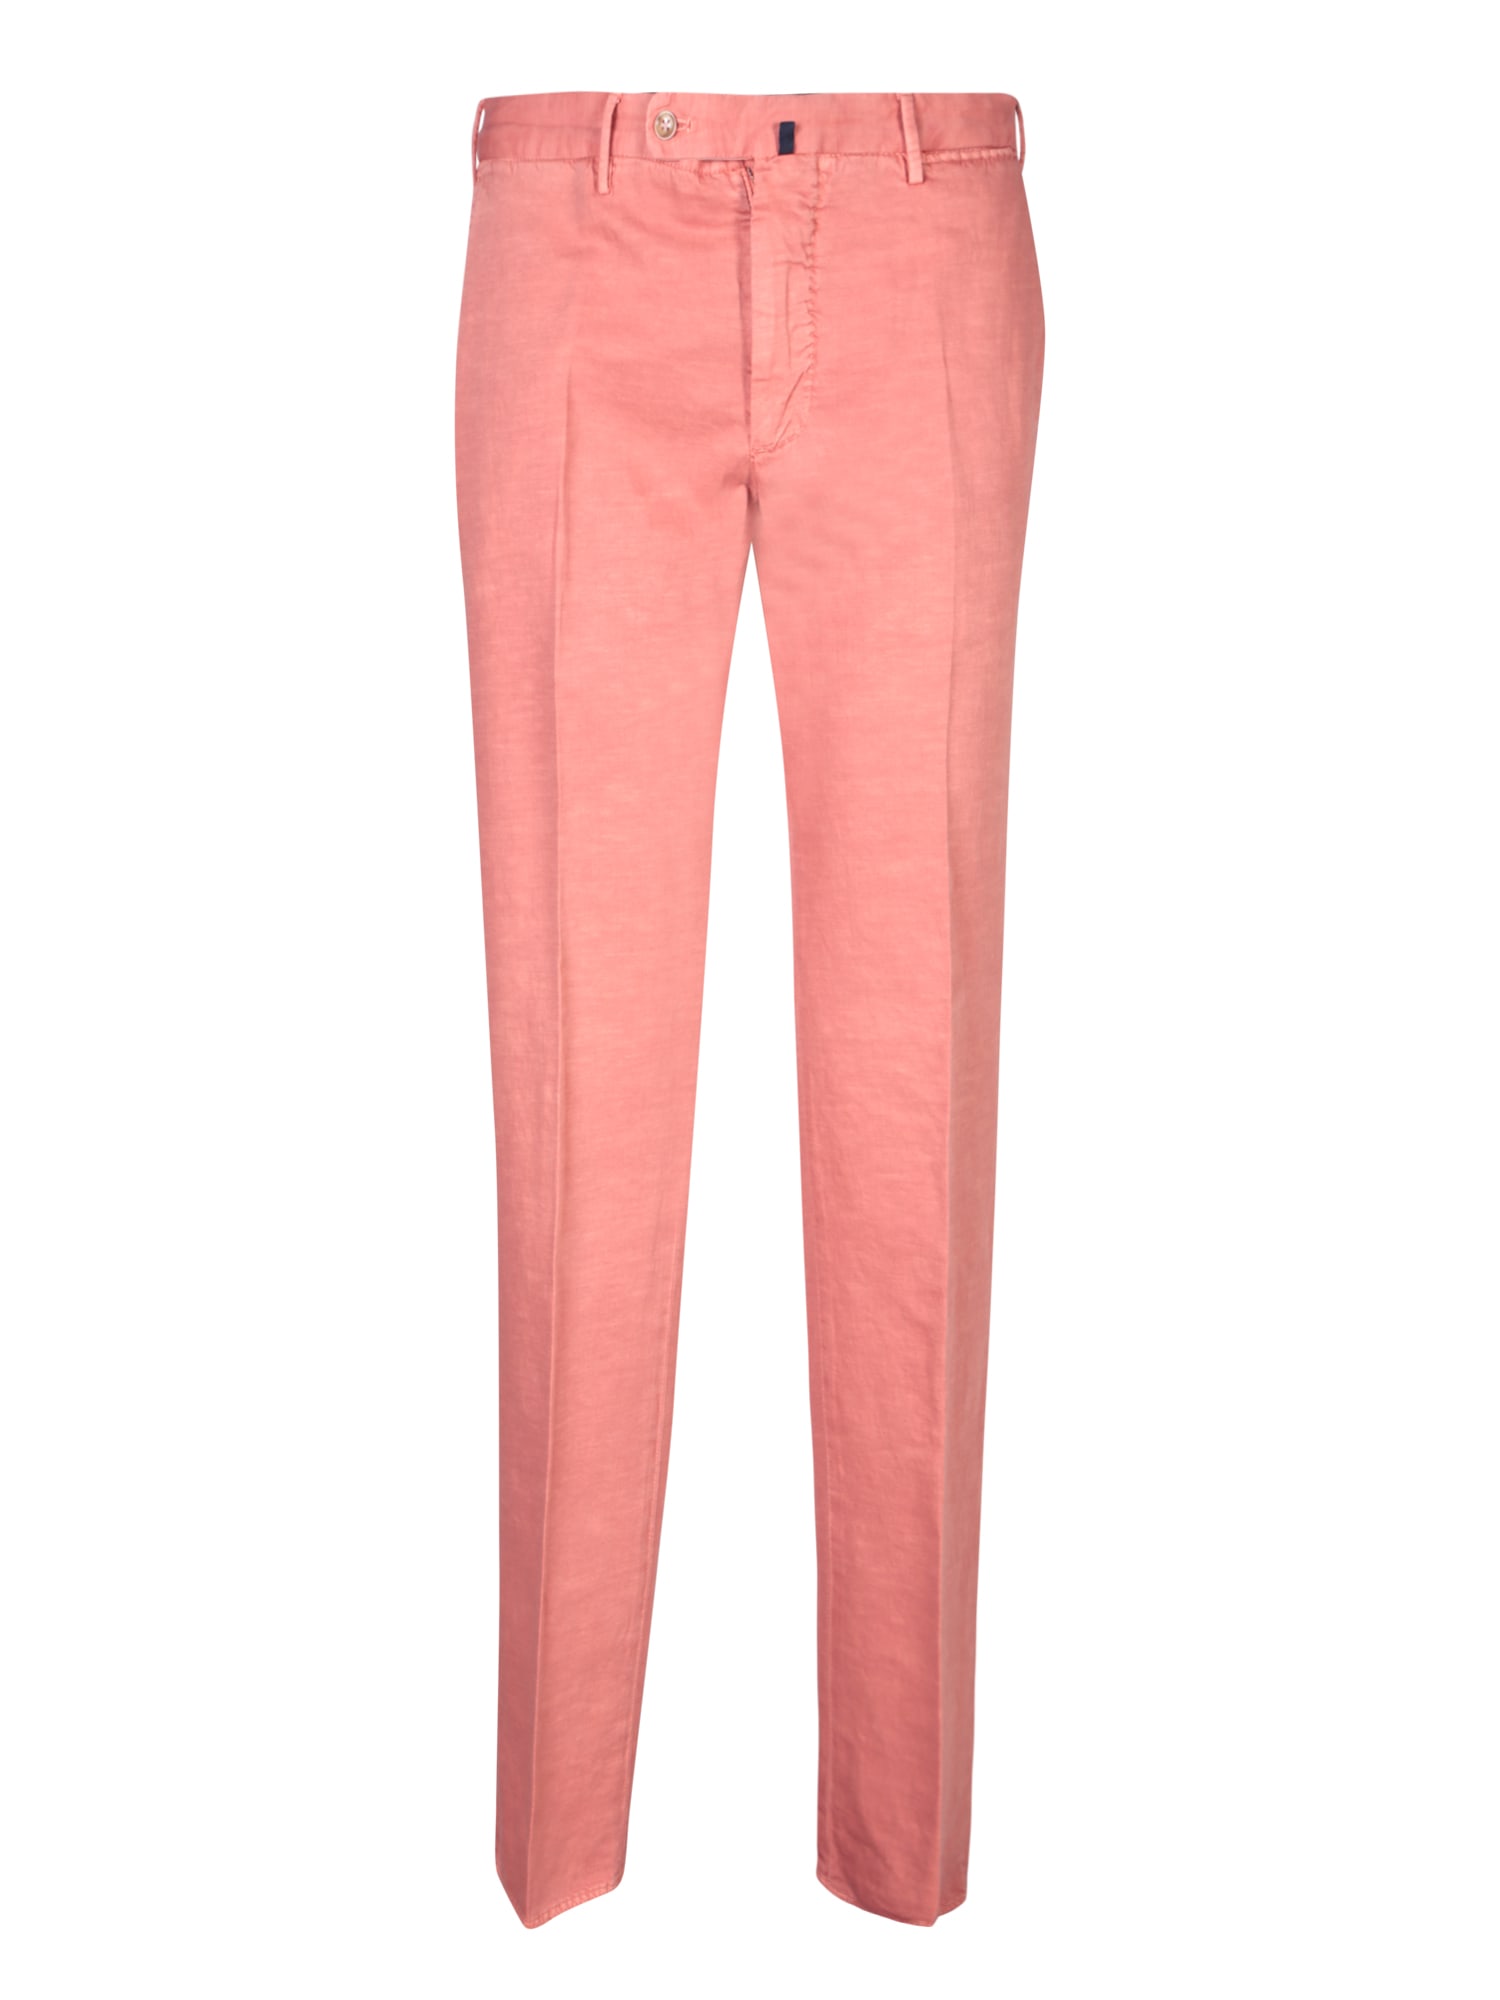 Pink Chino Linen Trousers By Incotex